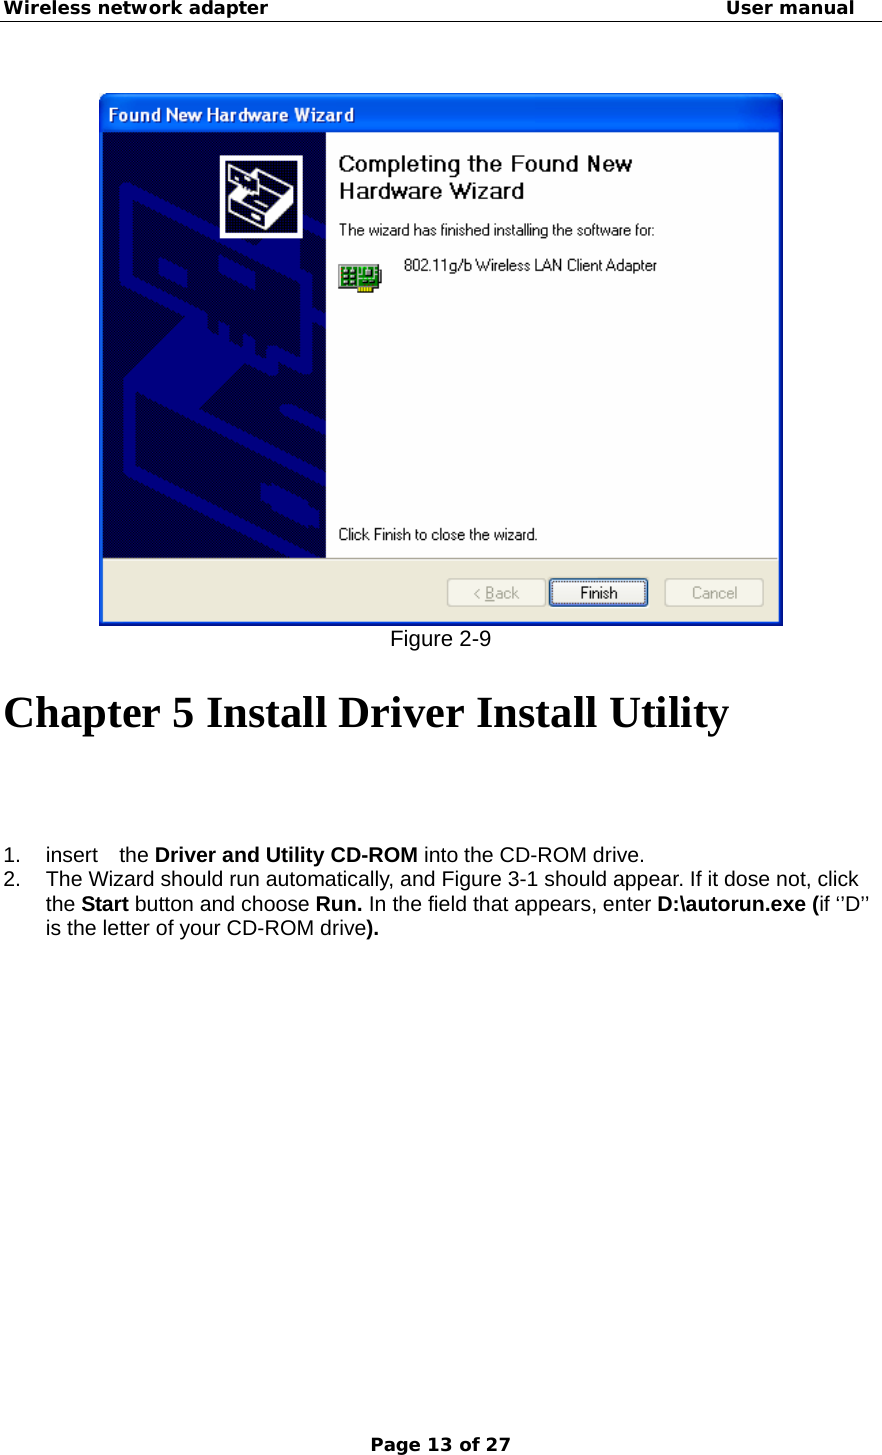 Wireless network adapter                                                  User manual Page 13 of 27   Figure 2-9 Chapter 5 Install Driver Install Utility 1. insert  the Driver and Utility CD-ROM into the CD-ROM drive. 2.  The Wizard should run automatically, and Figure 3-1 should appear. If it dose not, click the Start button and choose Run. In the field that appears, enter D:\autorun.exe (if ‘’D’’ is the letter of your CD-ROM drive).   